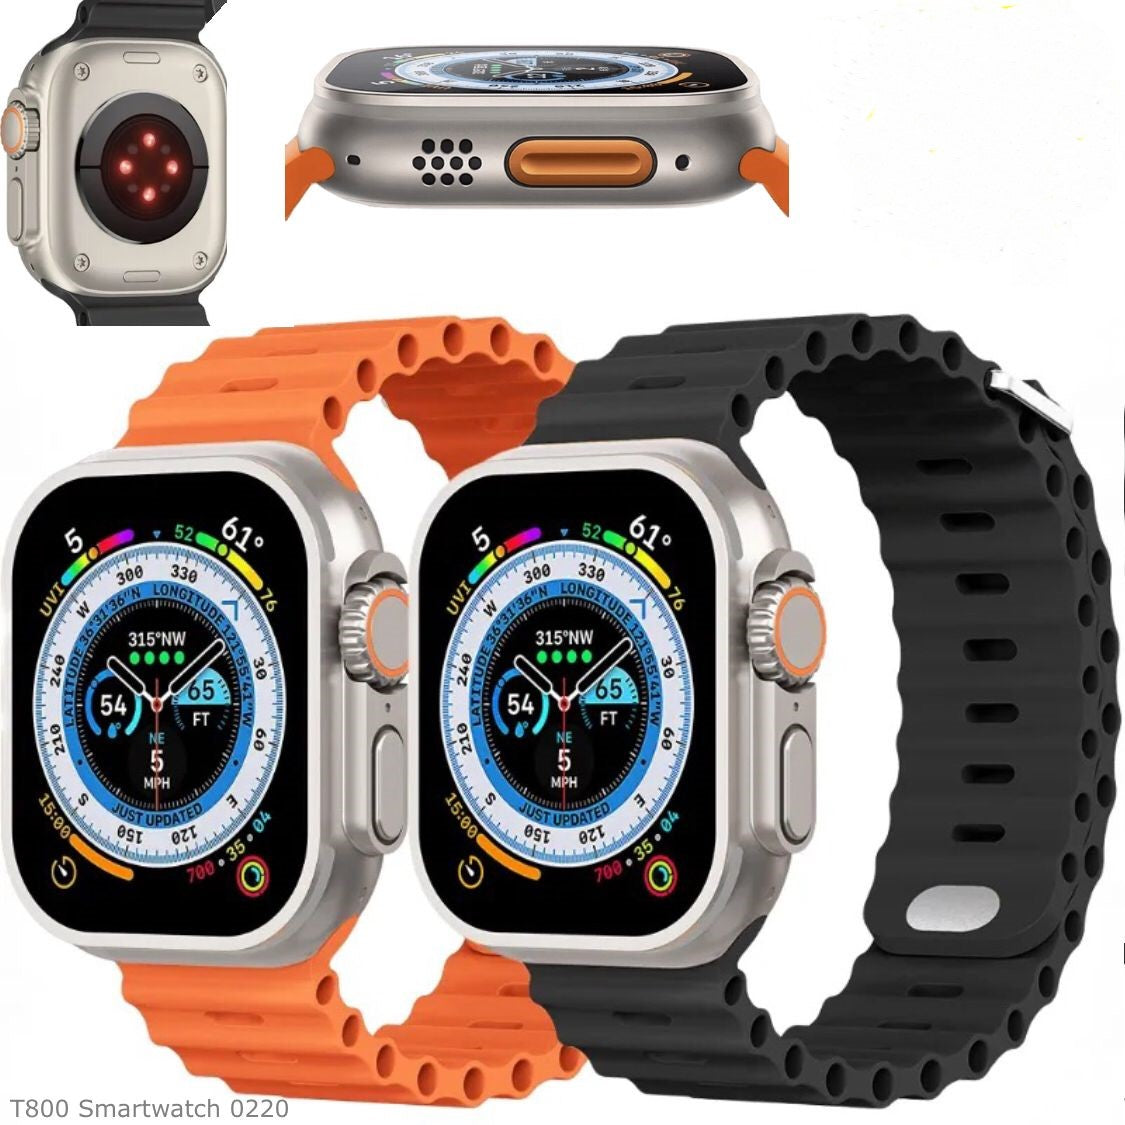 Buy 1 Get 1 Free | T800 Smart Watch with Smart Features